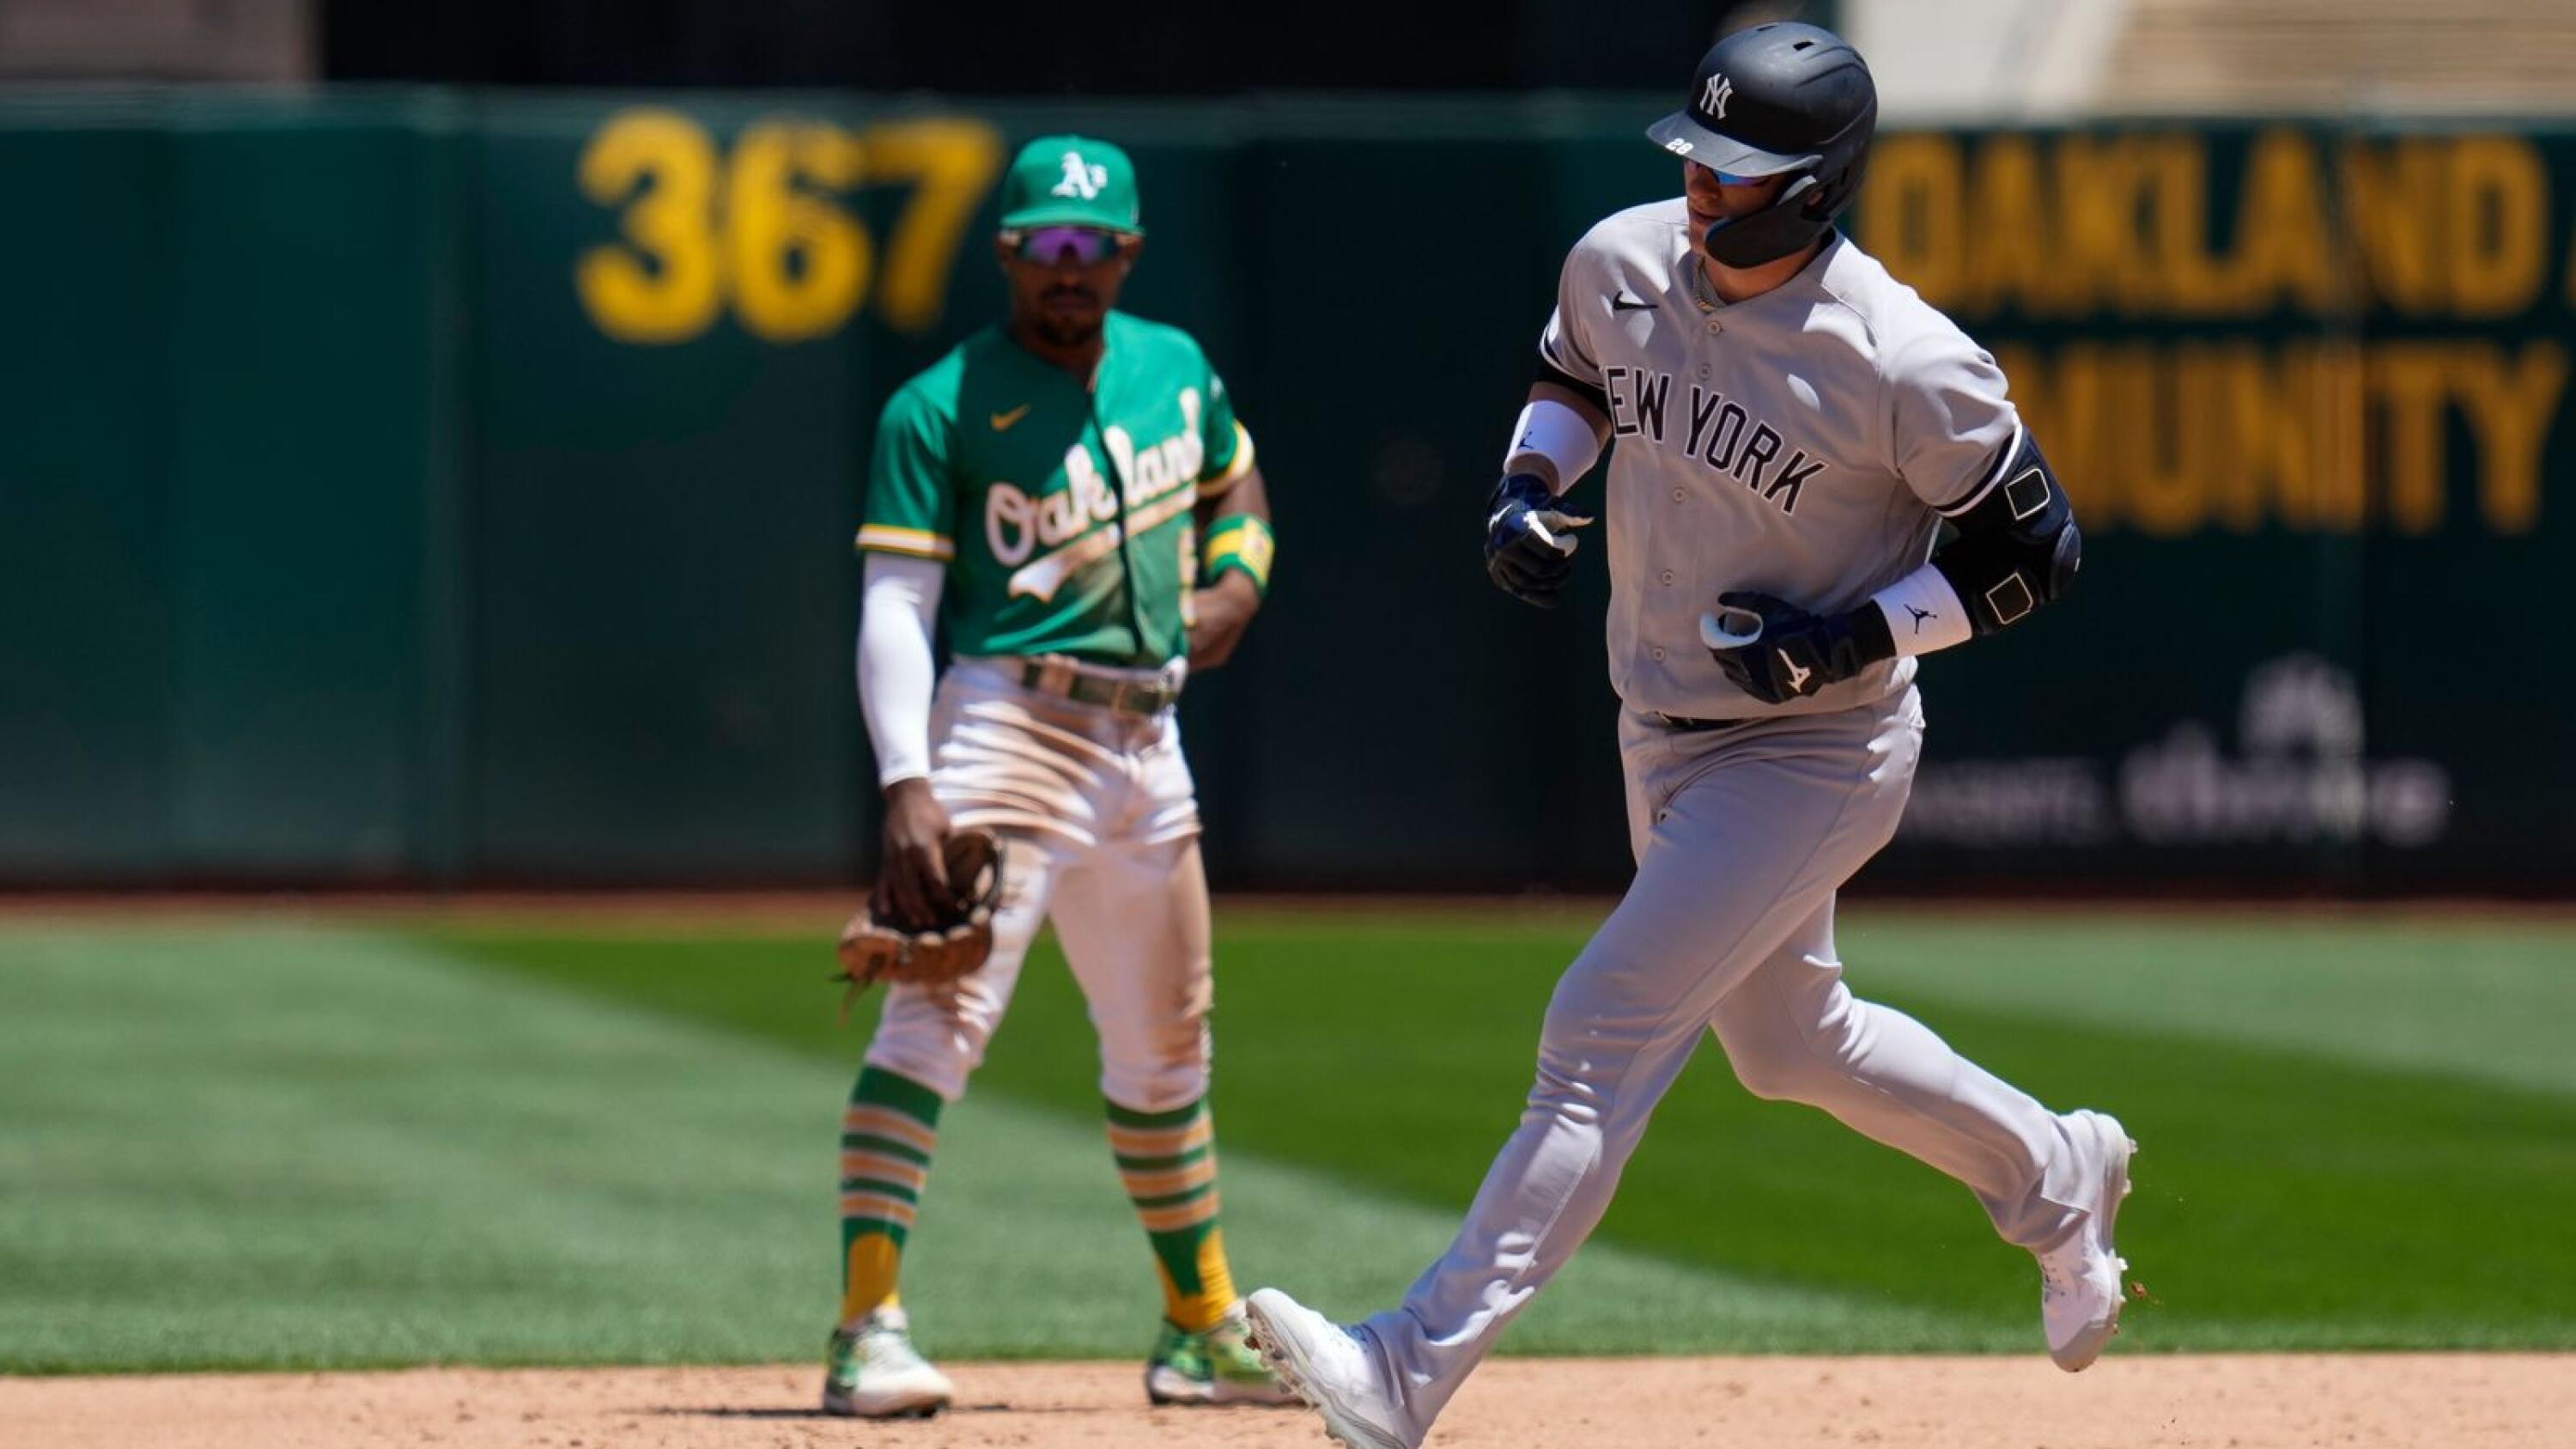 Donaldson, Kiner-Falefa lead Yankees over A's 10-4 as New York wins 2 of 3  in the series